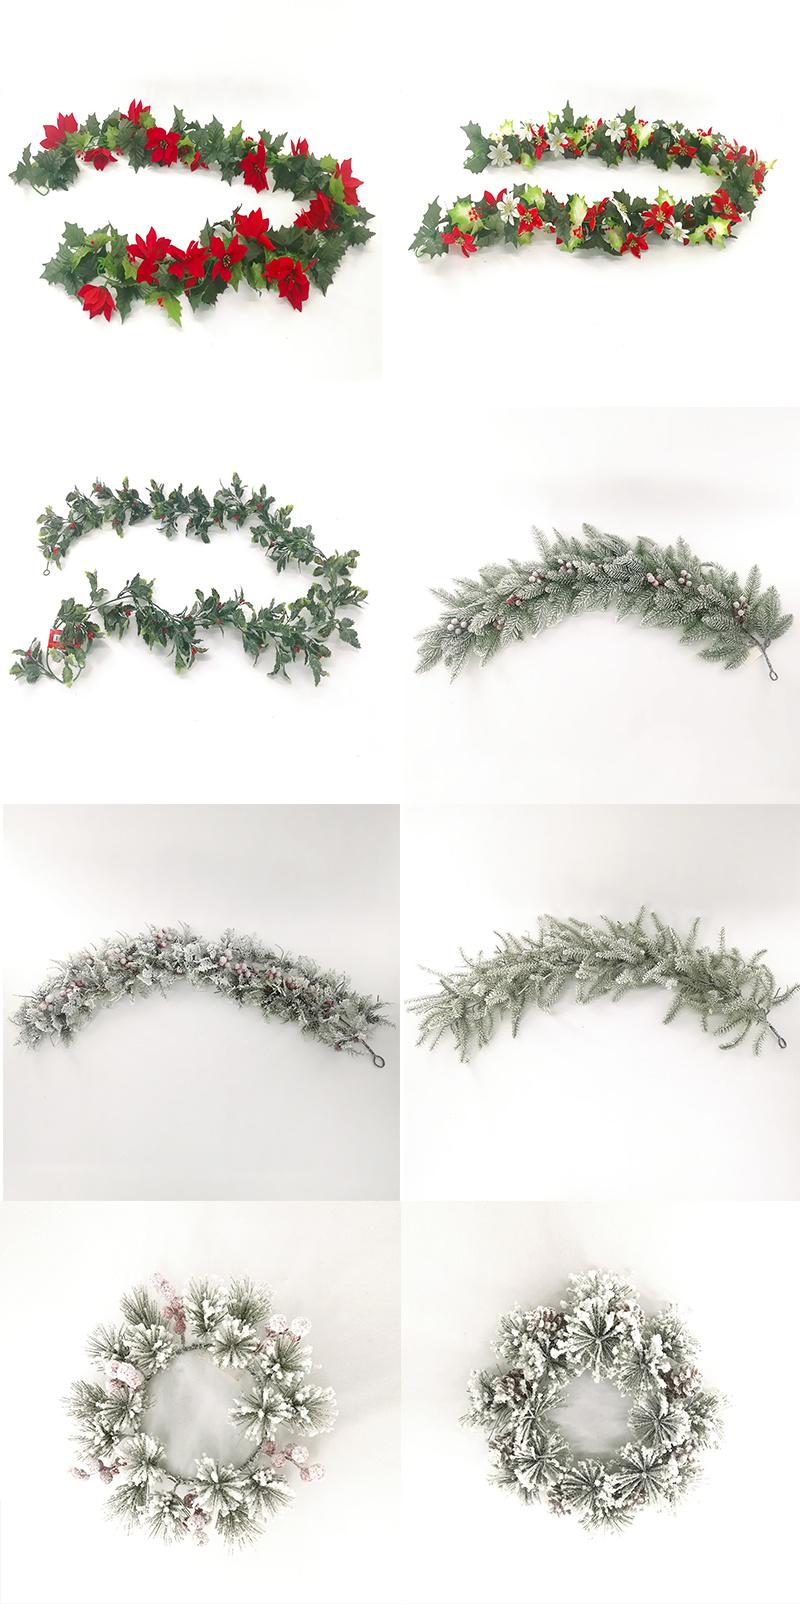 Low Price Promotional PVC Artificial Christmas Wreath/Garland for Christmas